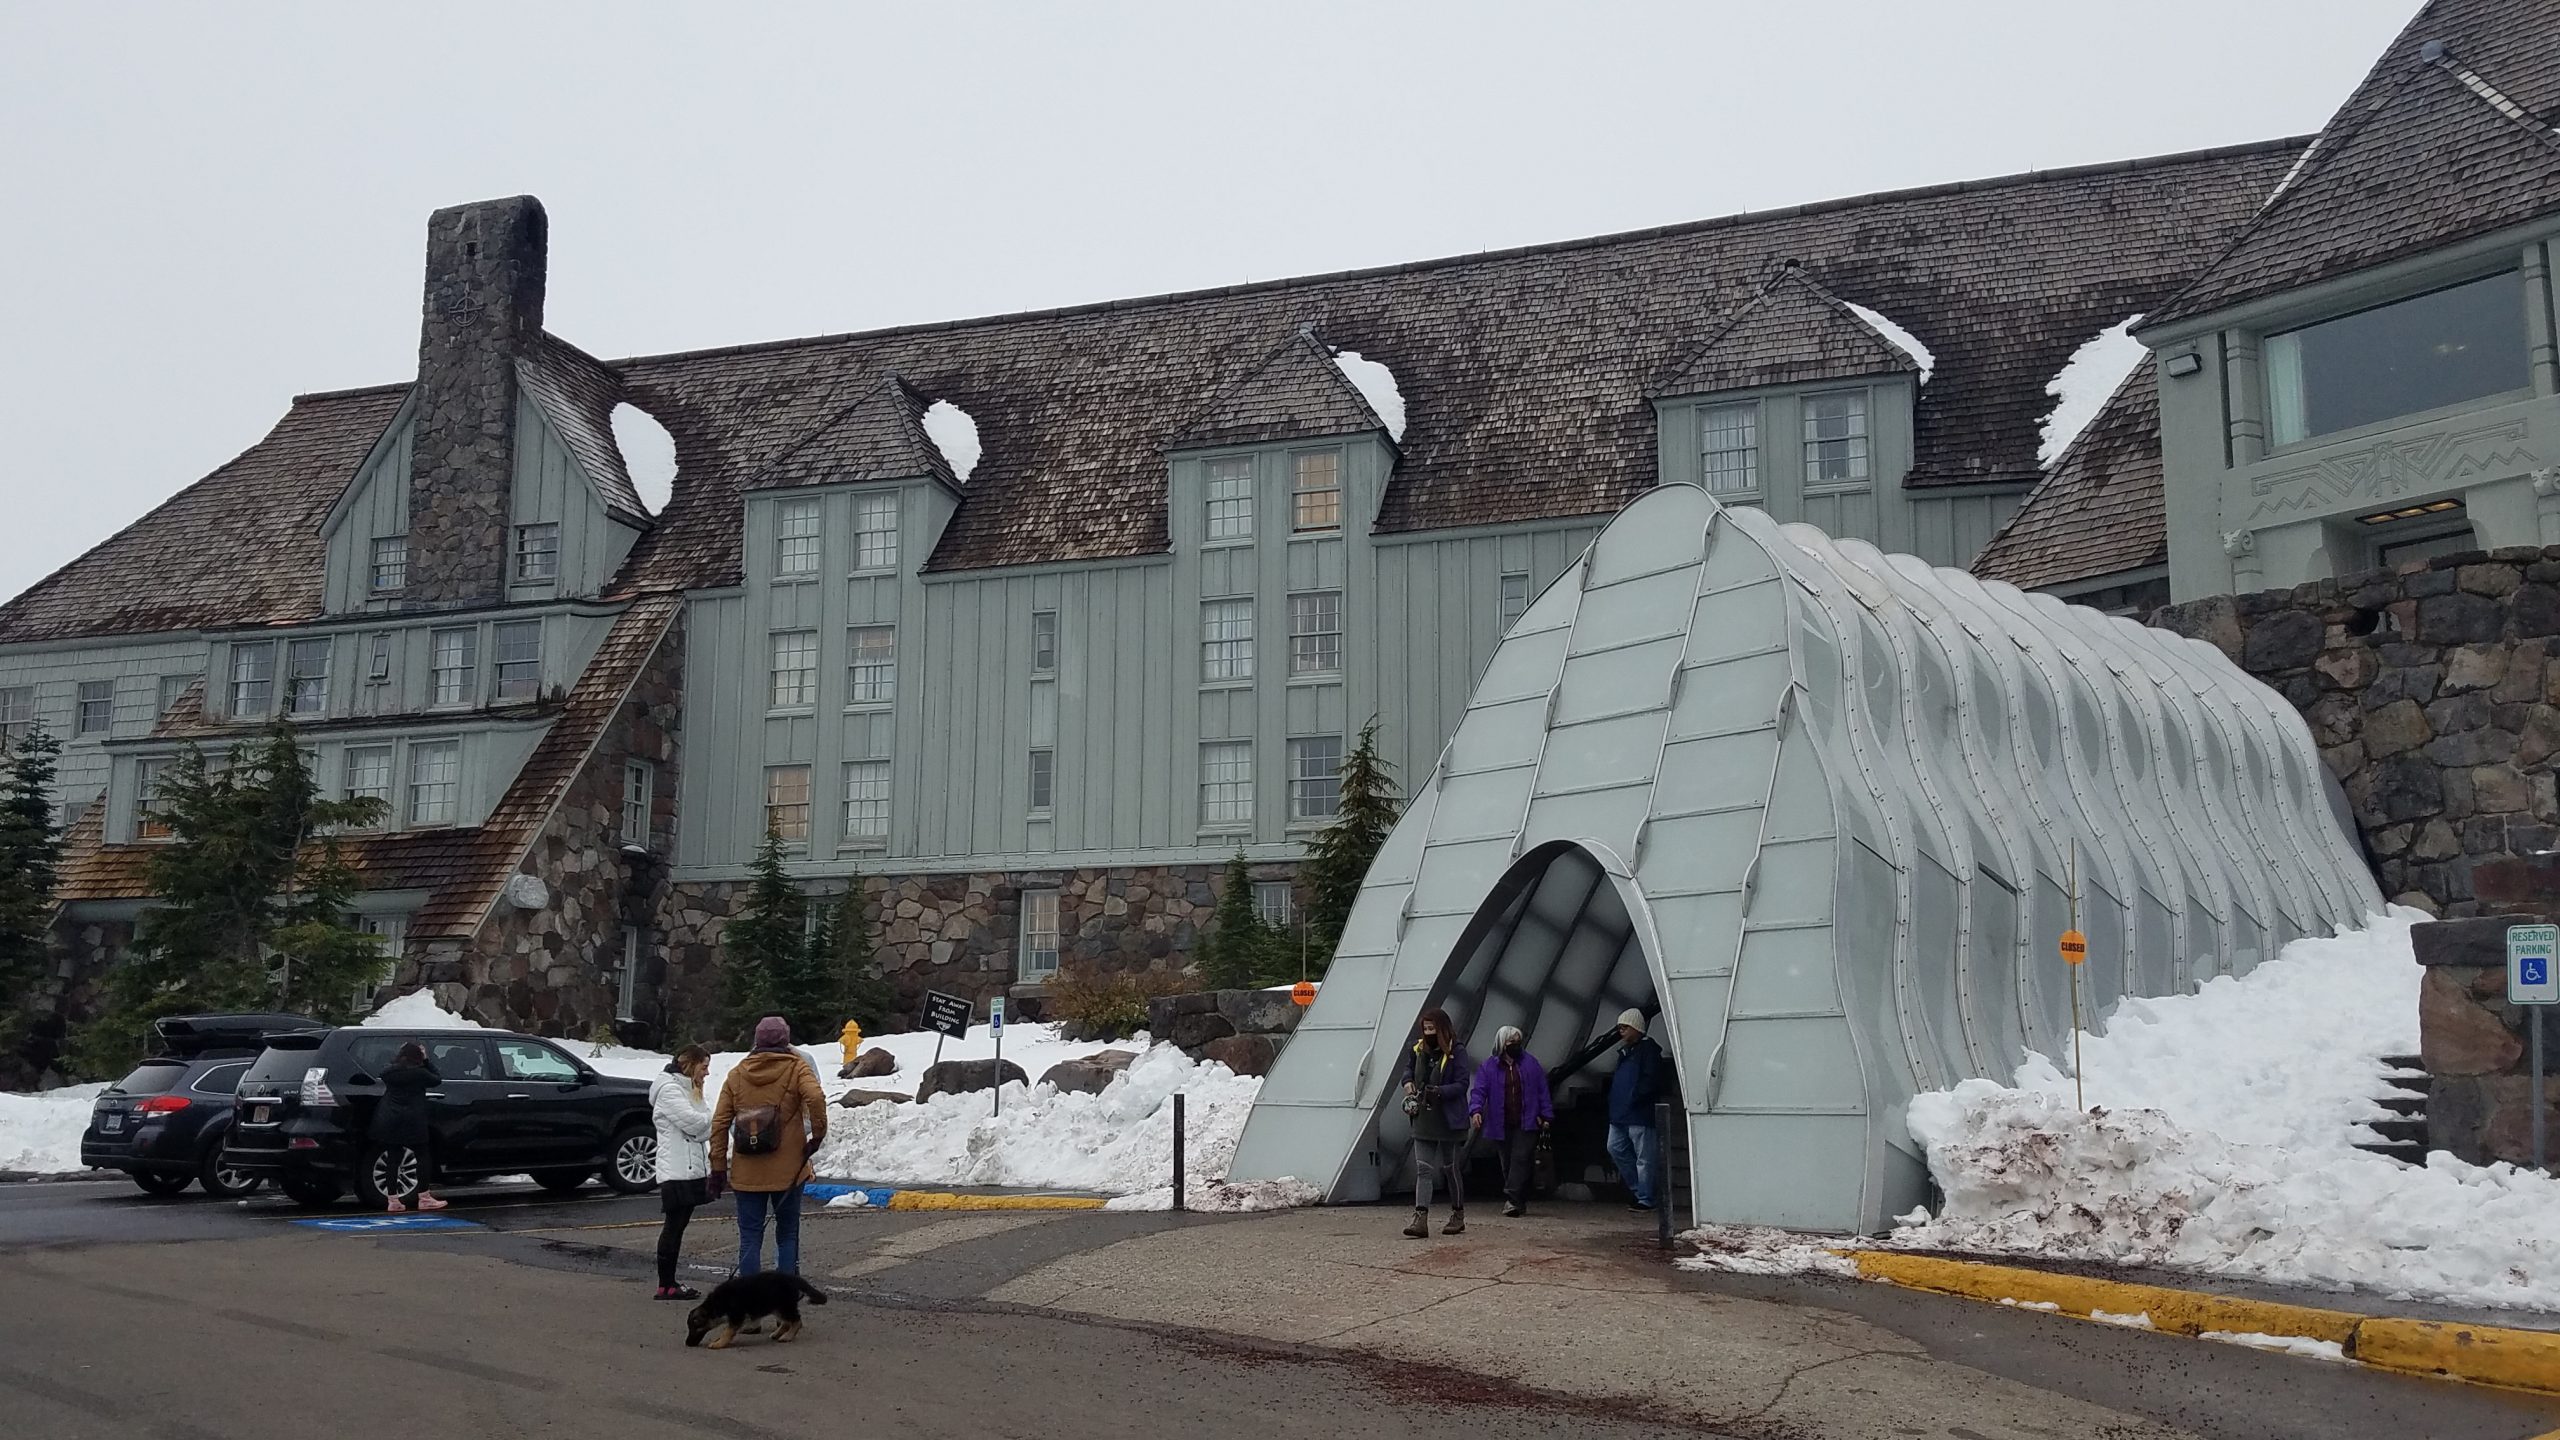 The exterior of the historic Timberline Lodge.